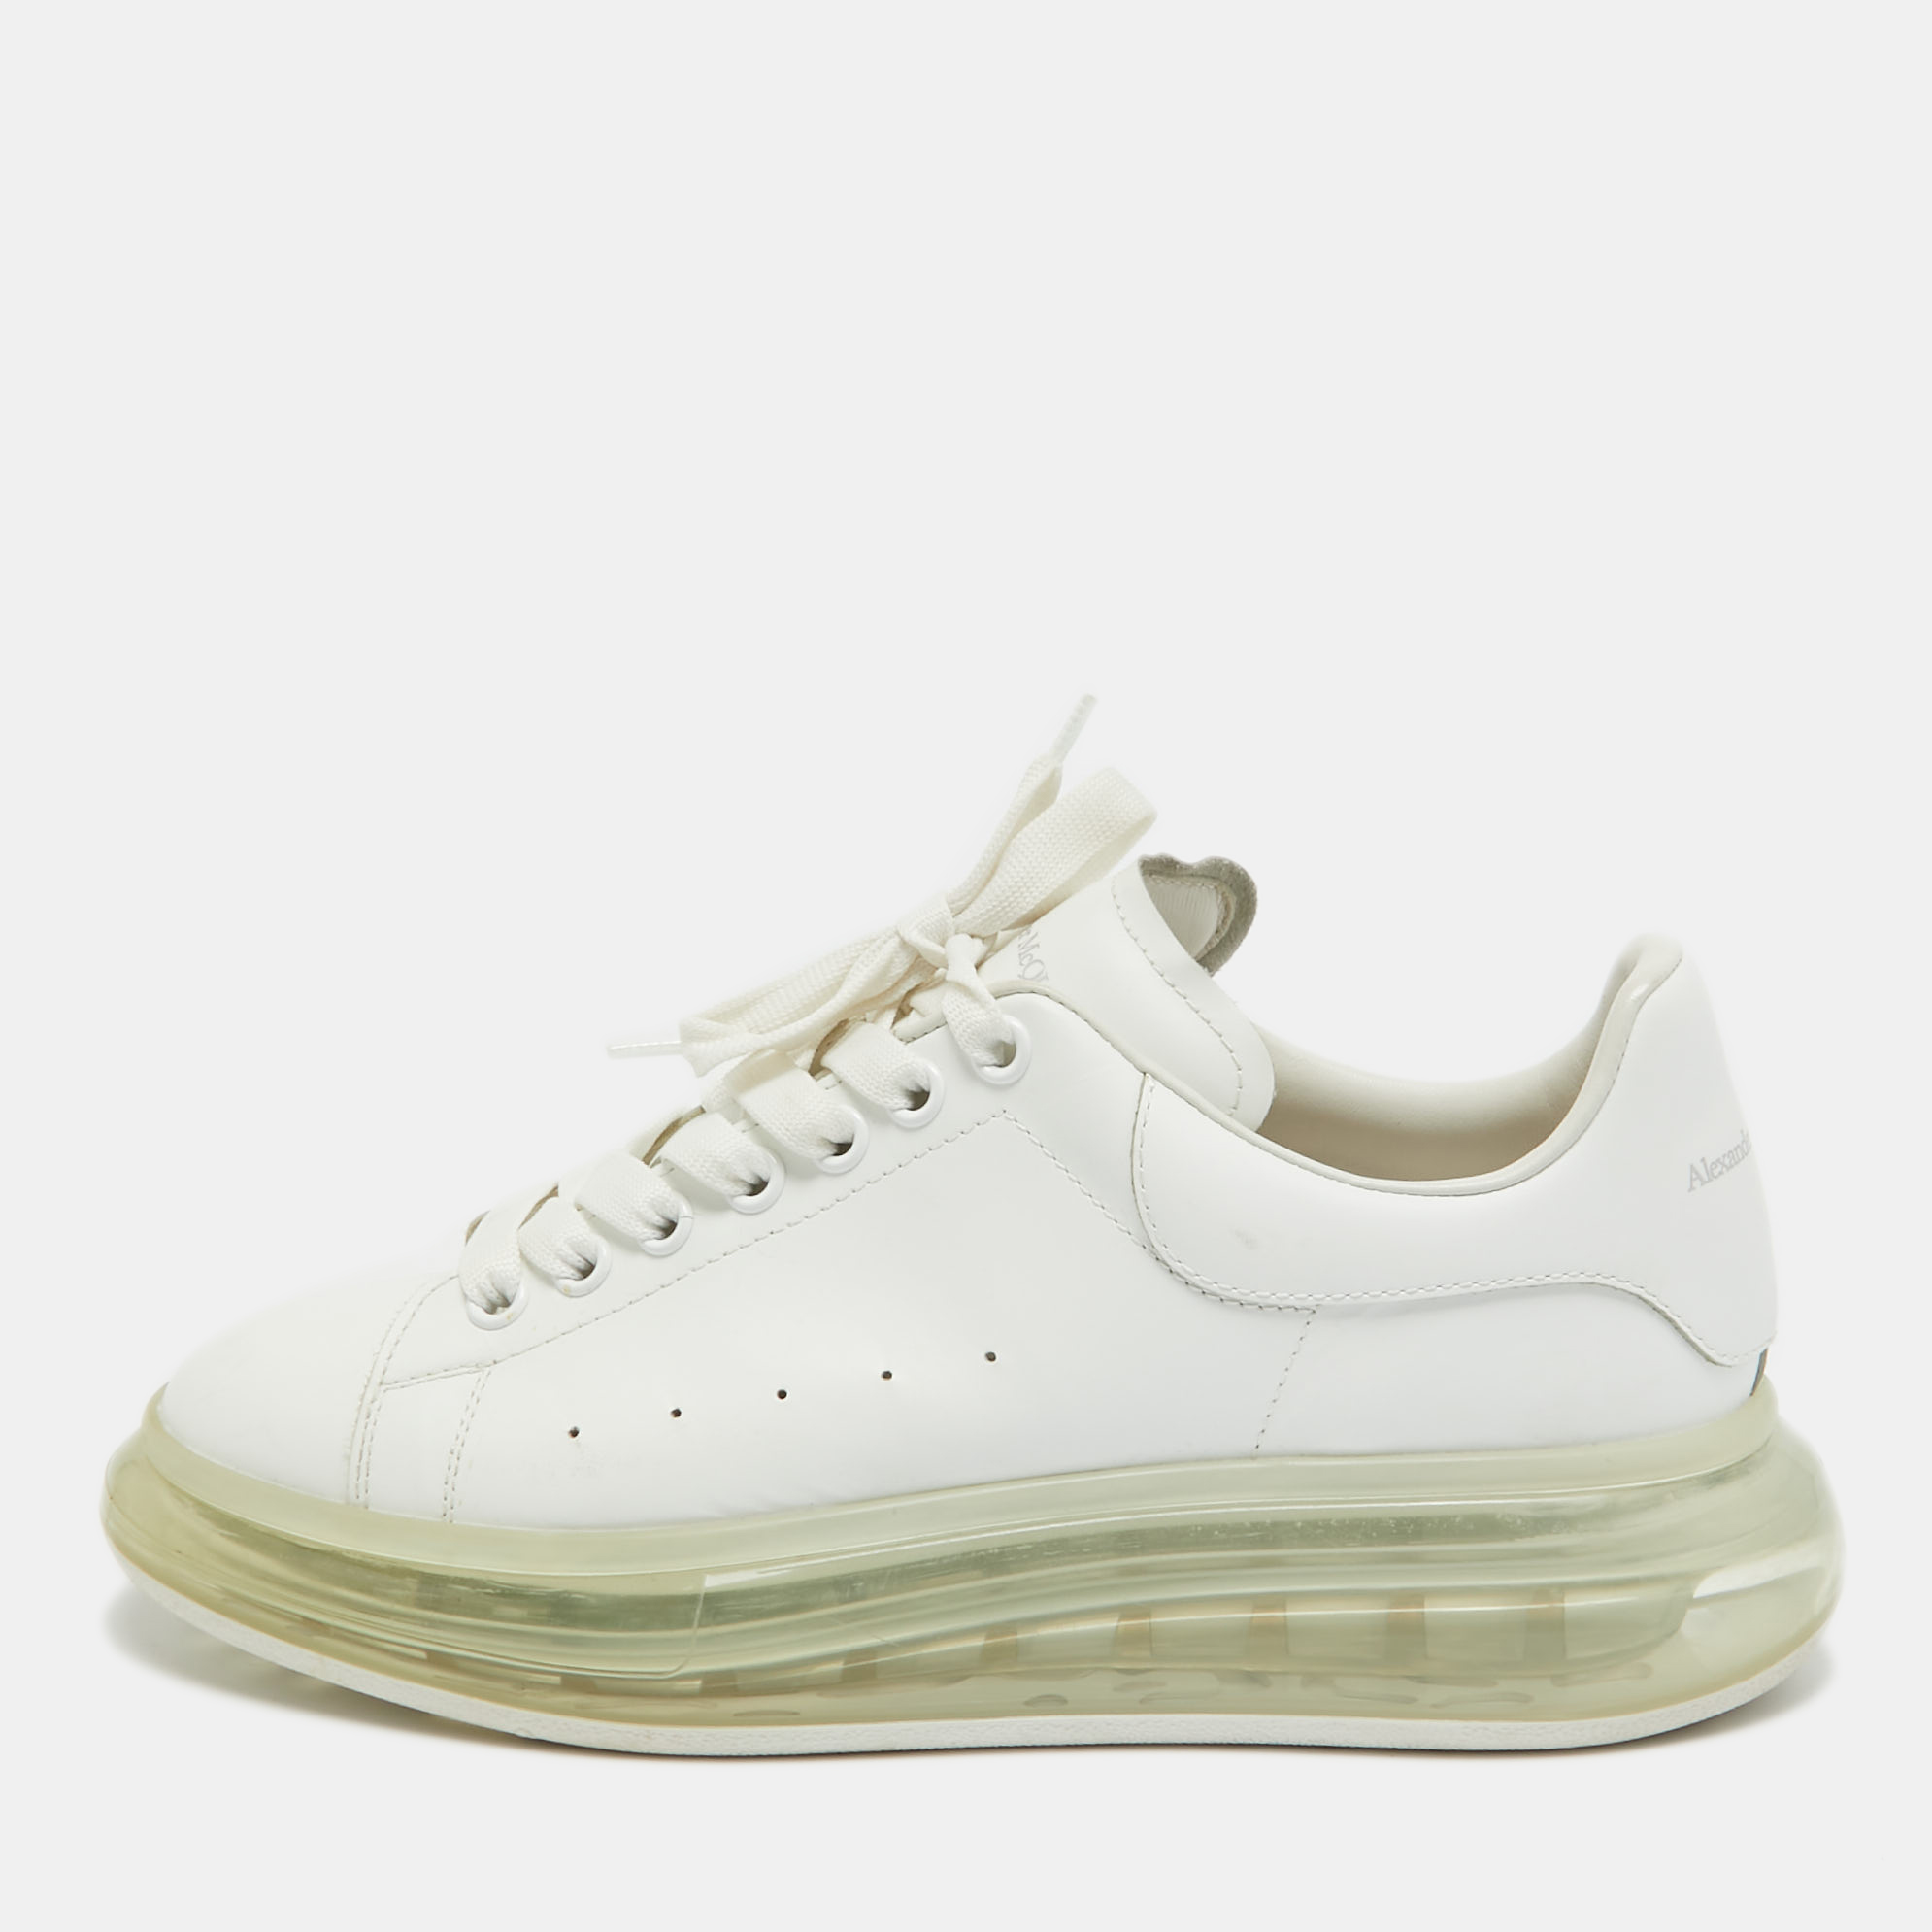 Pre-owned Alexander Mcqueen White Leather Oversized Transparent Sole Trainers Size 42.5